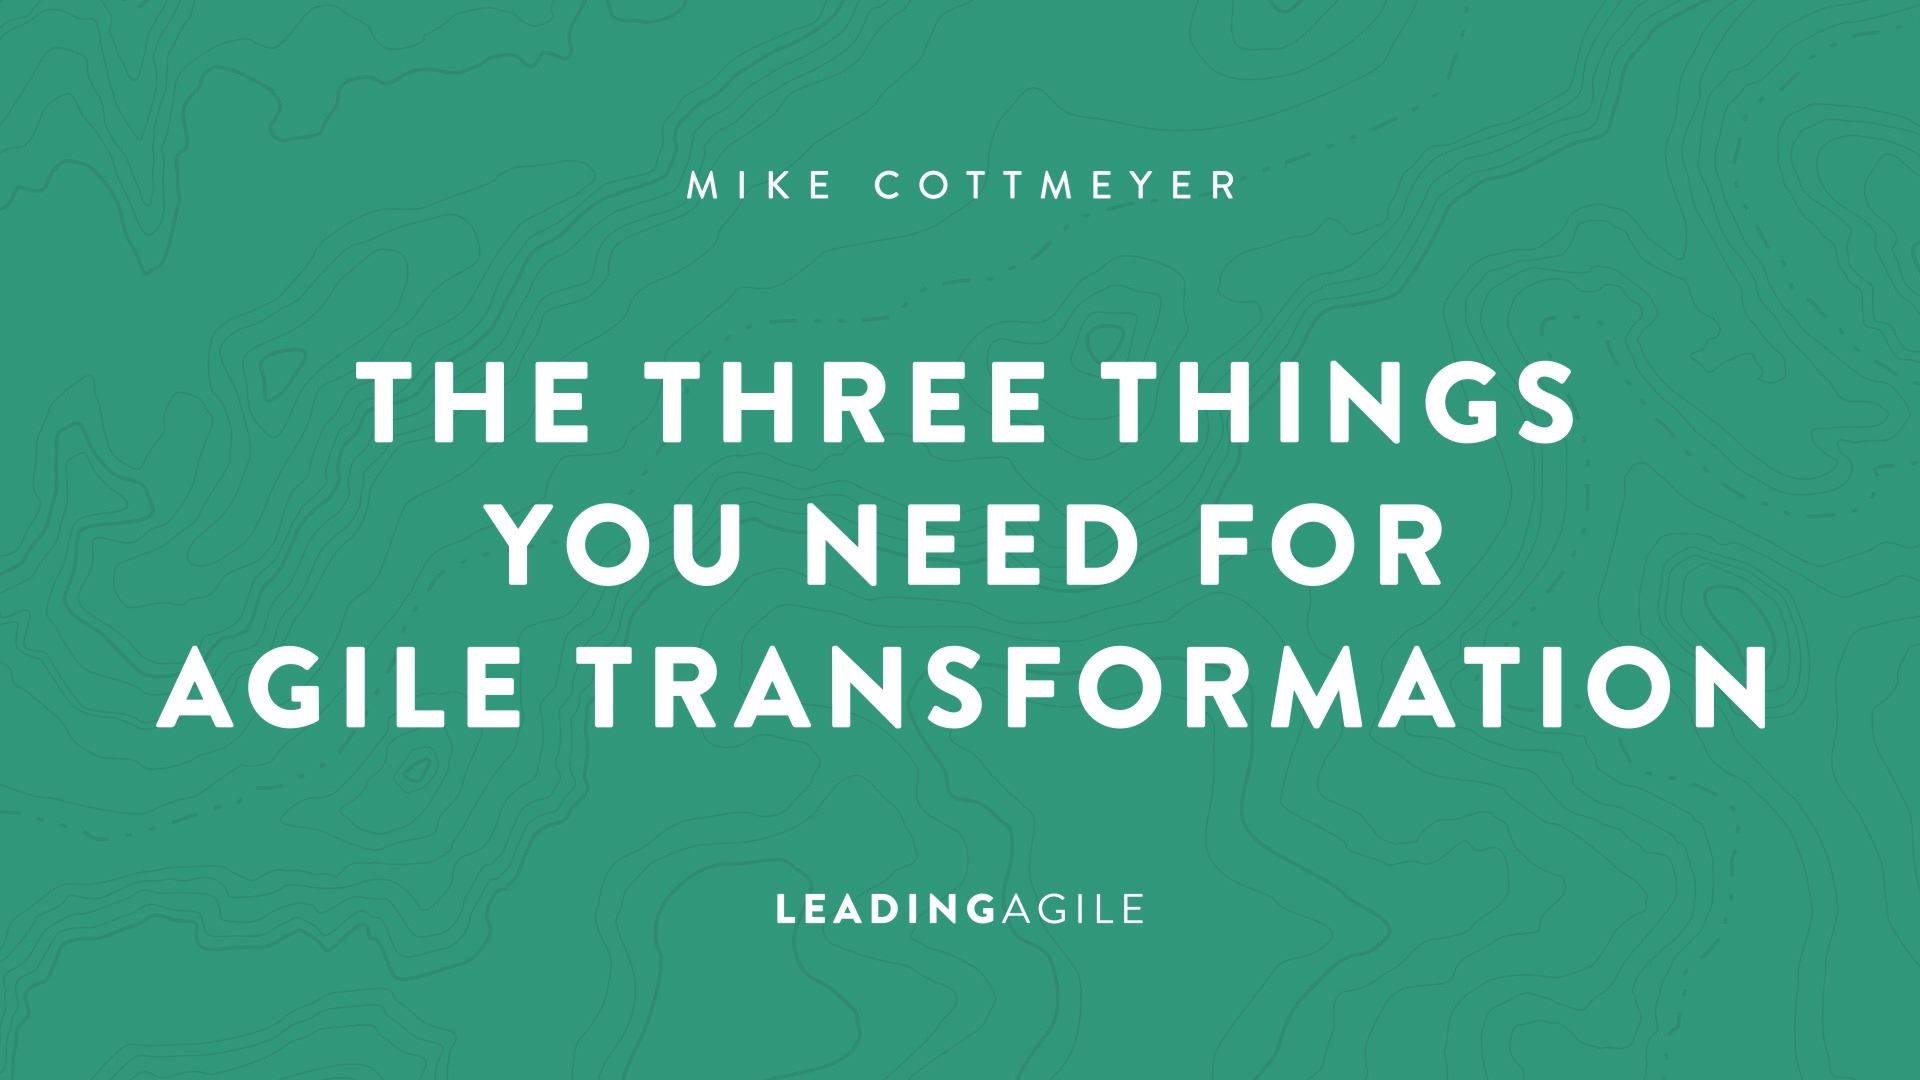 The Three Things You Need For Agile Transformation